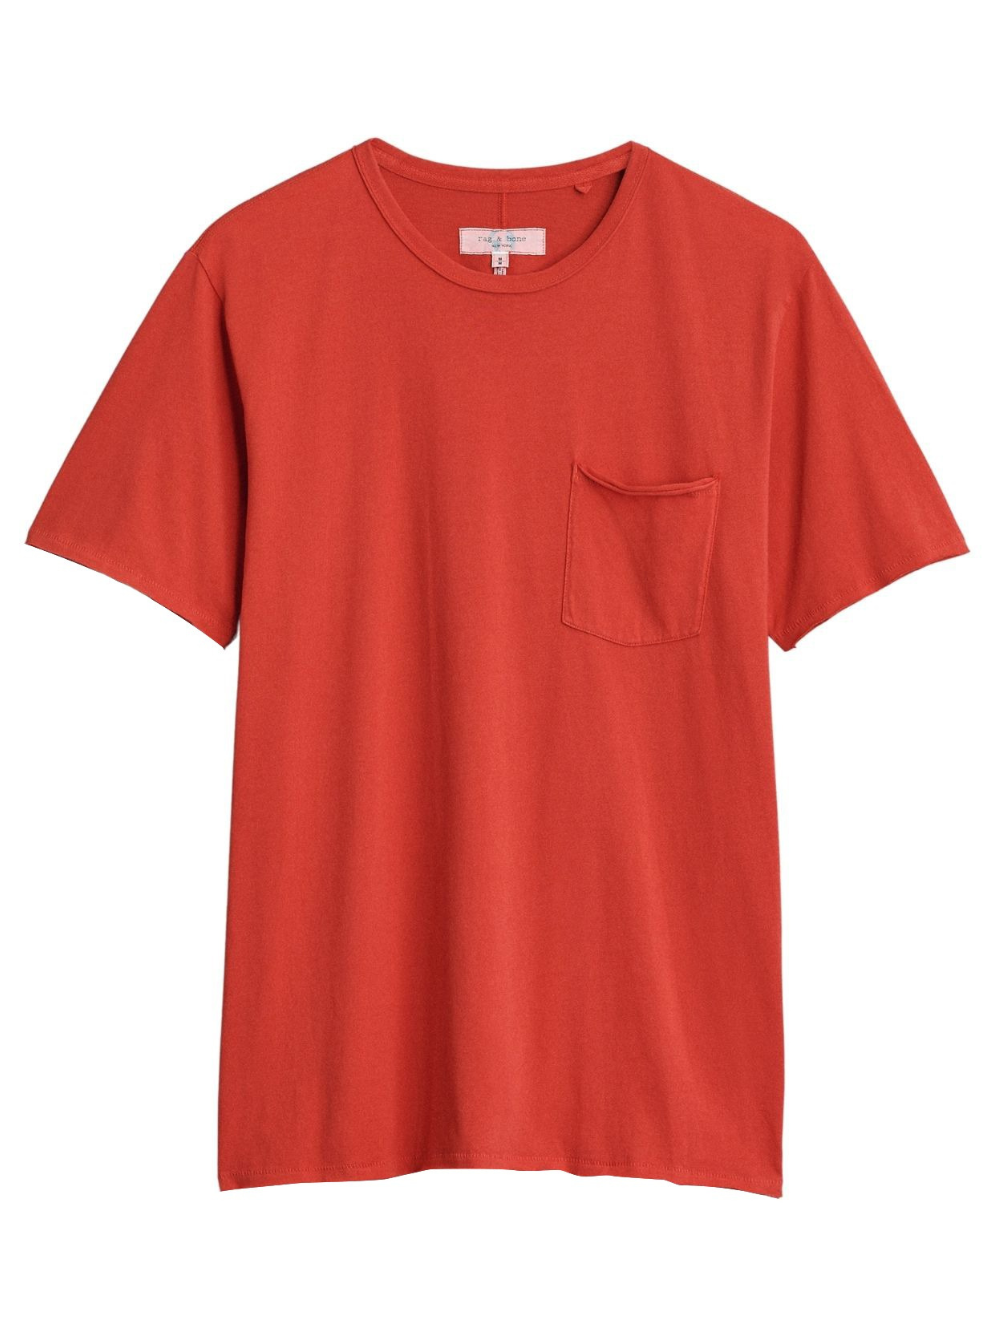 rag-and-bone-Miles-Tee-In-Principal-Jersey-Red-1